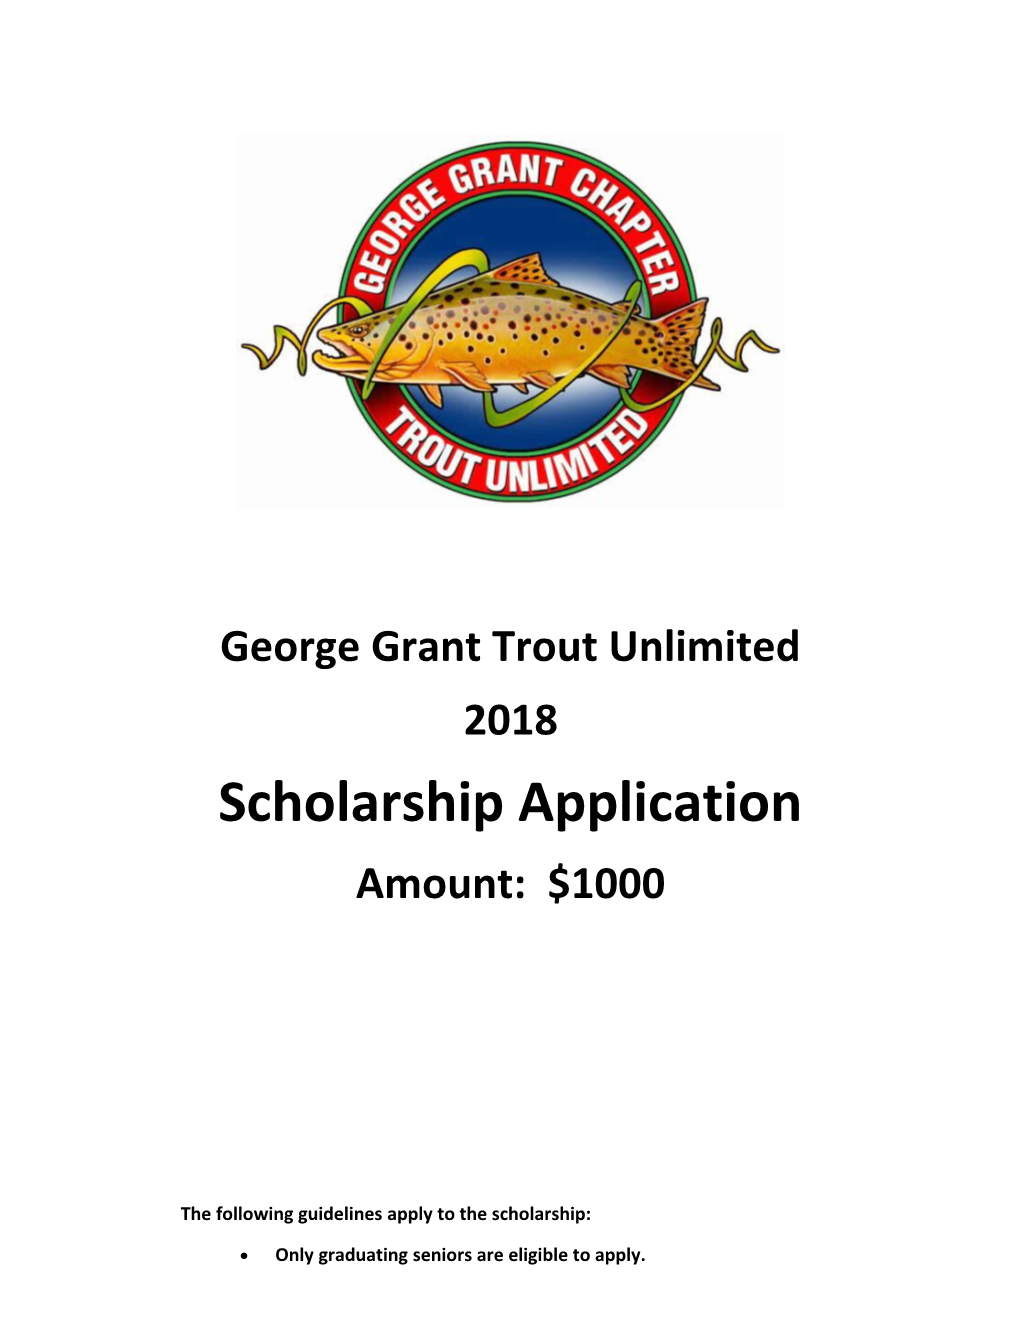 George Grant Trout Unlimited